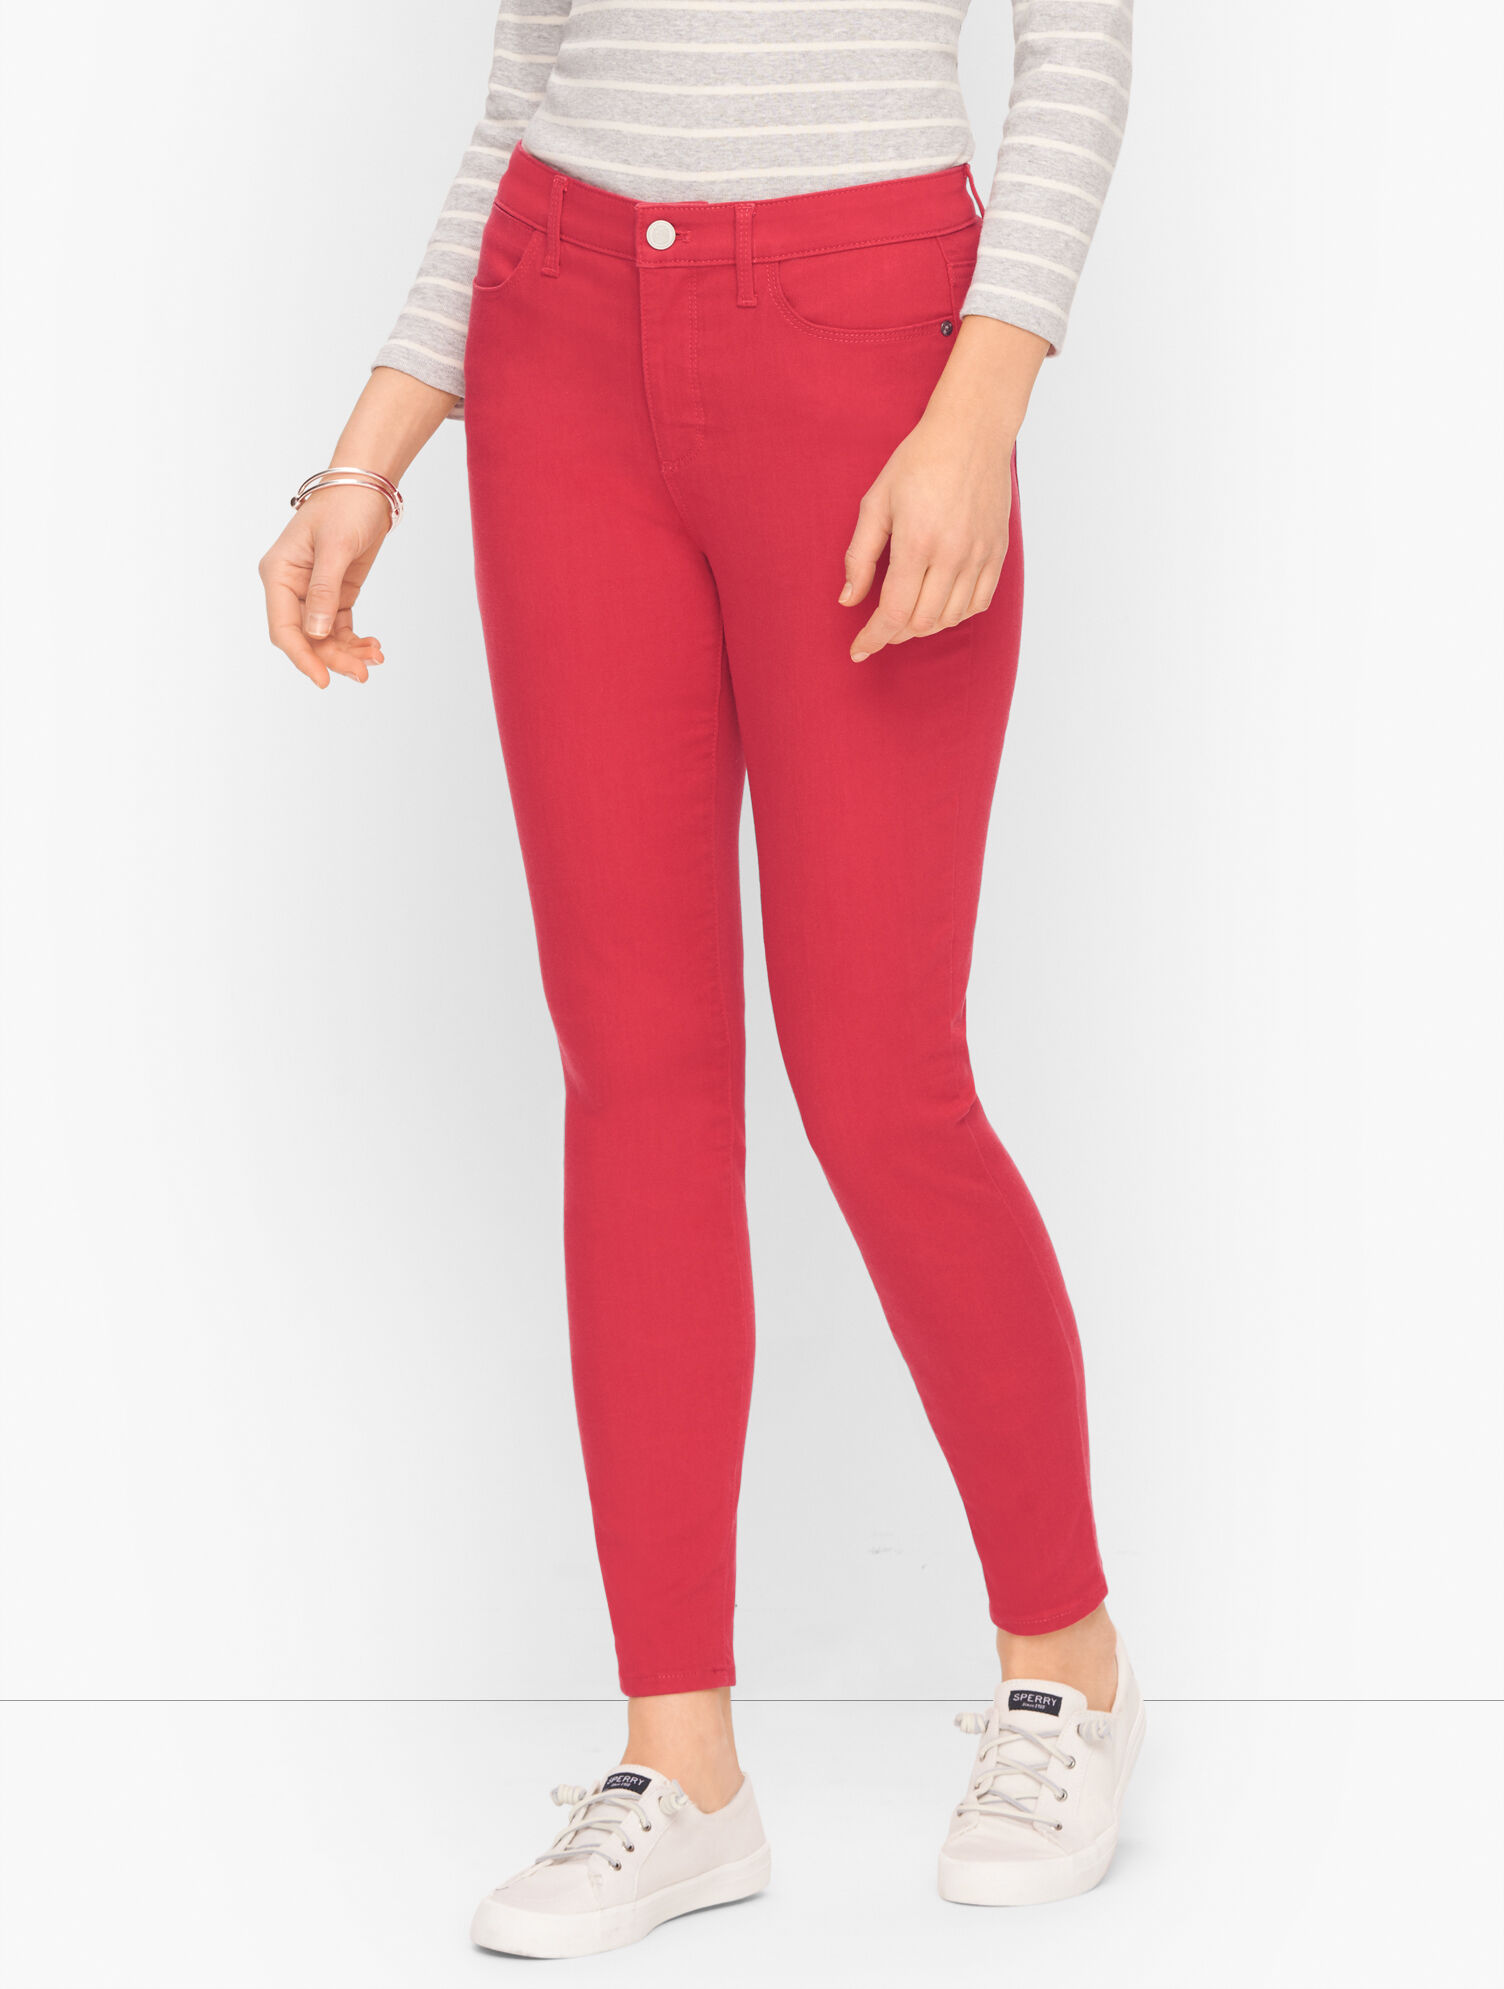 Jeggings - Color